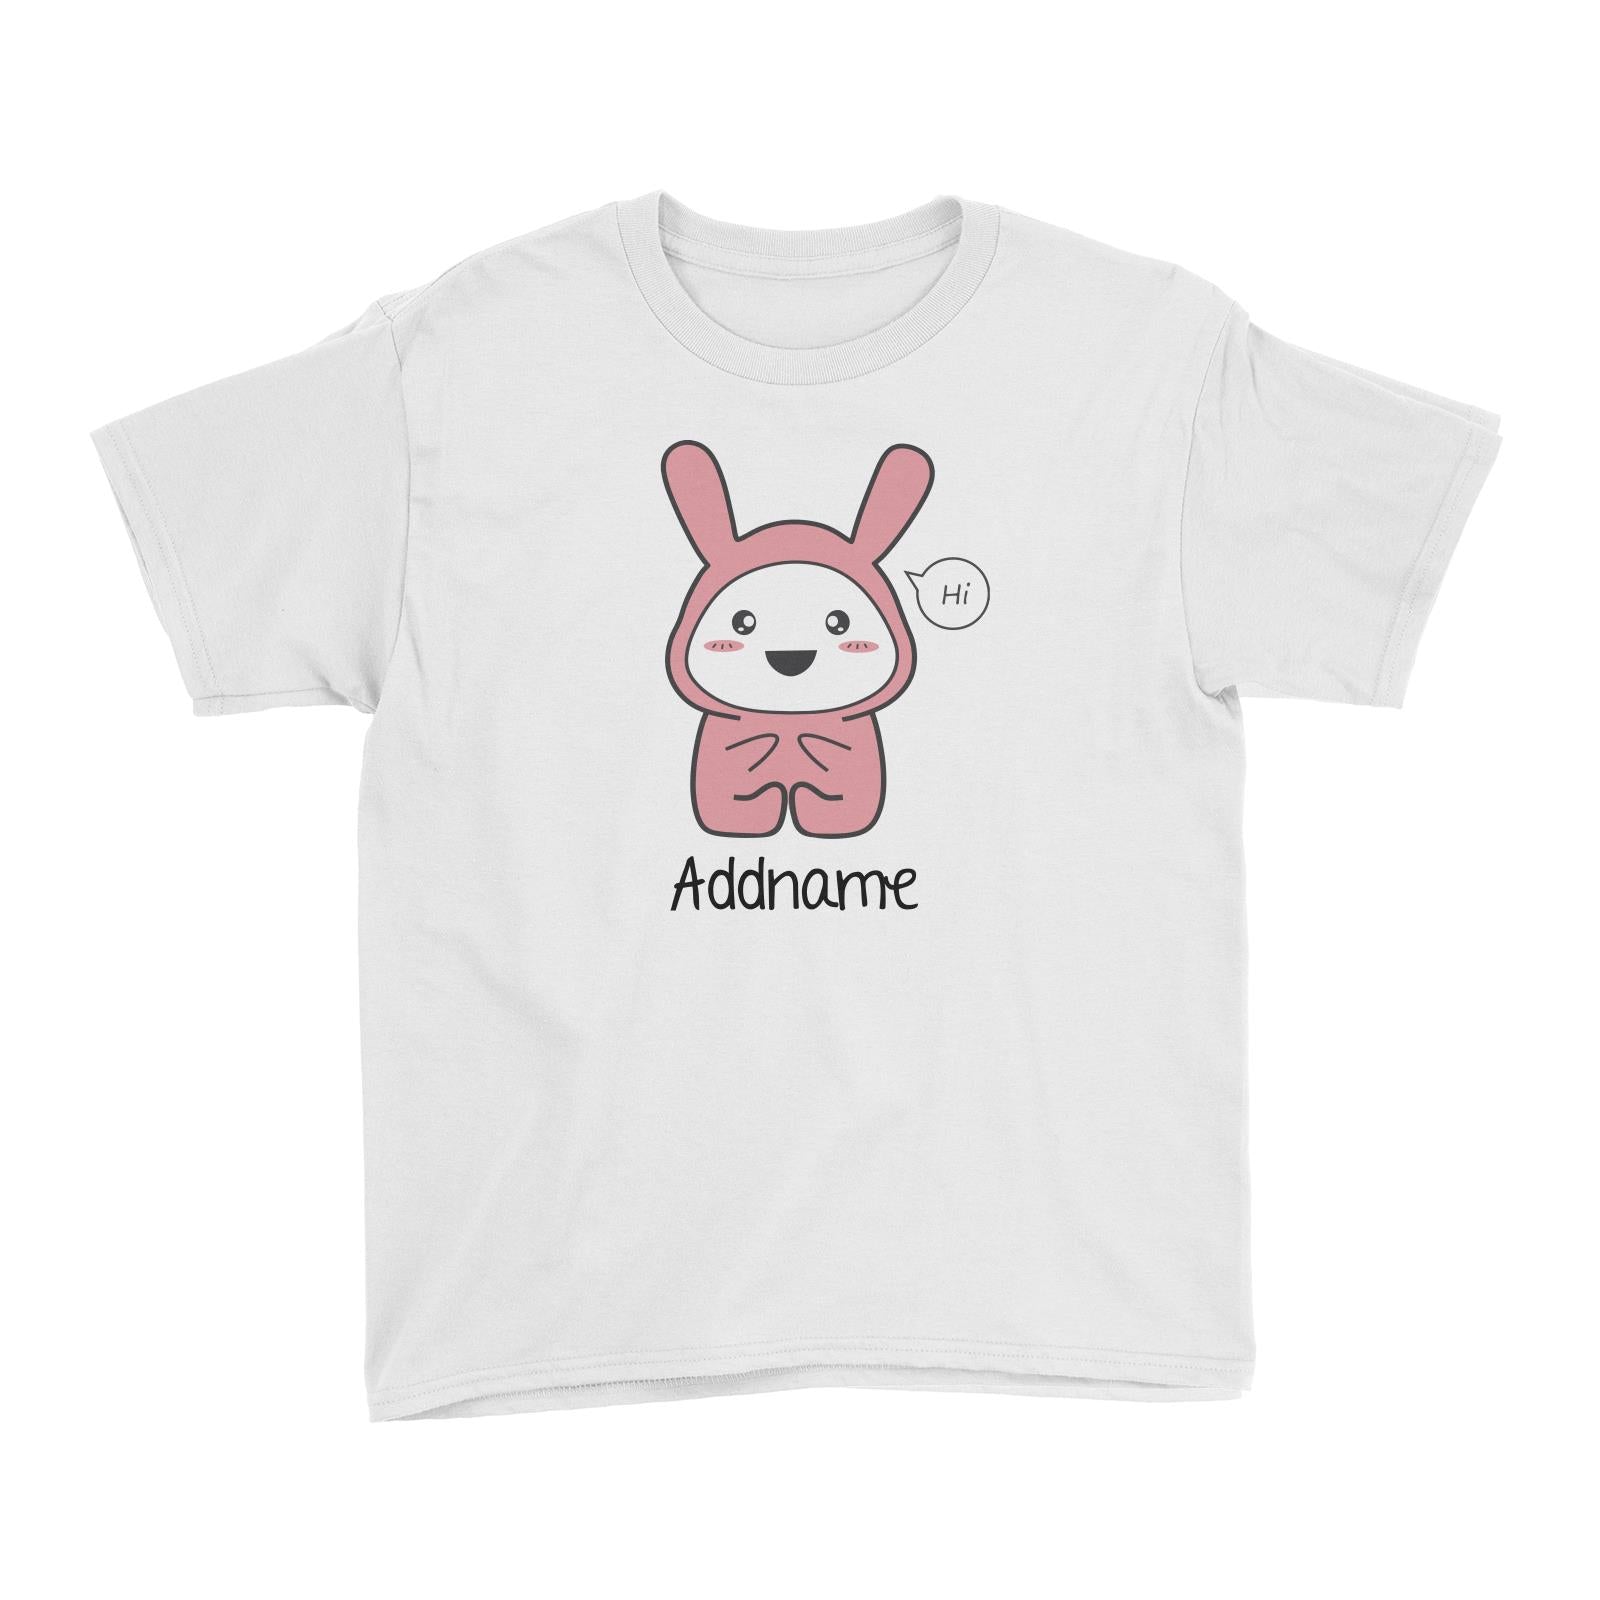 Cute Hamster in Rabbit Suit Baby Addname Kid's T-Shirt